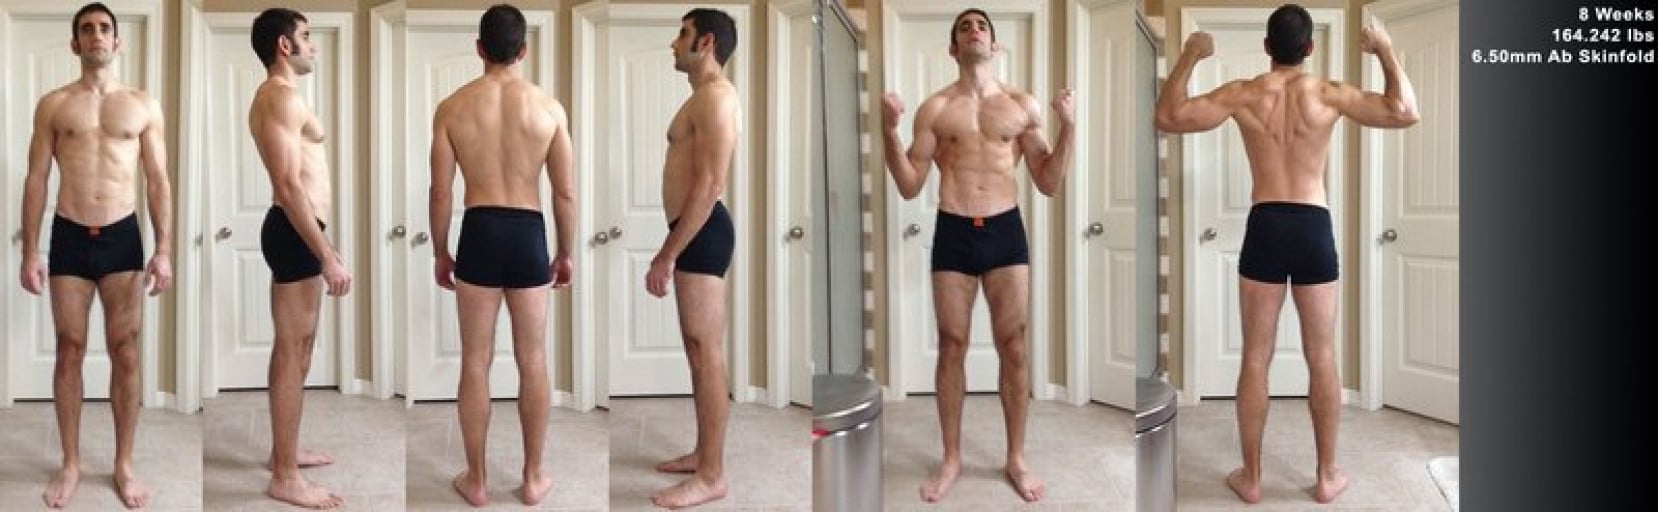 A before and after photo of a 5'11" male showing a snapshot of 164 pounds at a height of 5'11